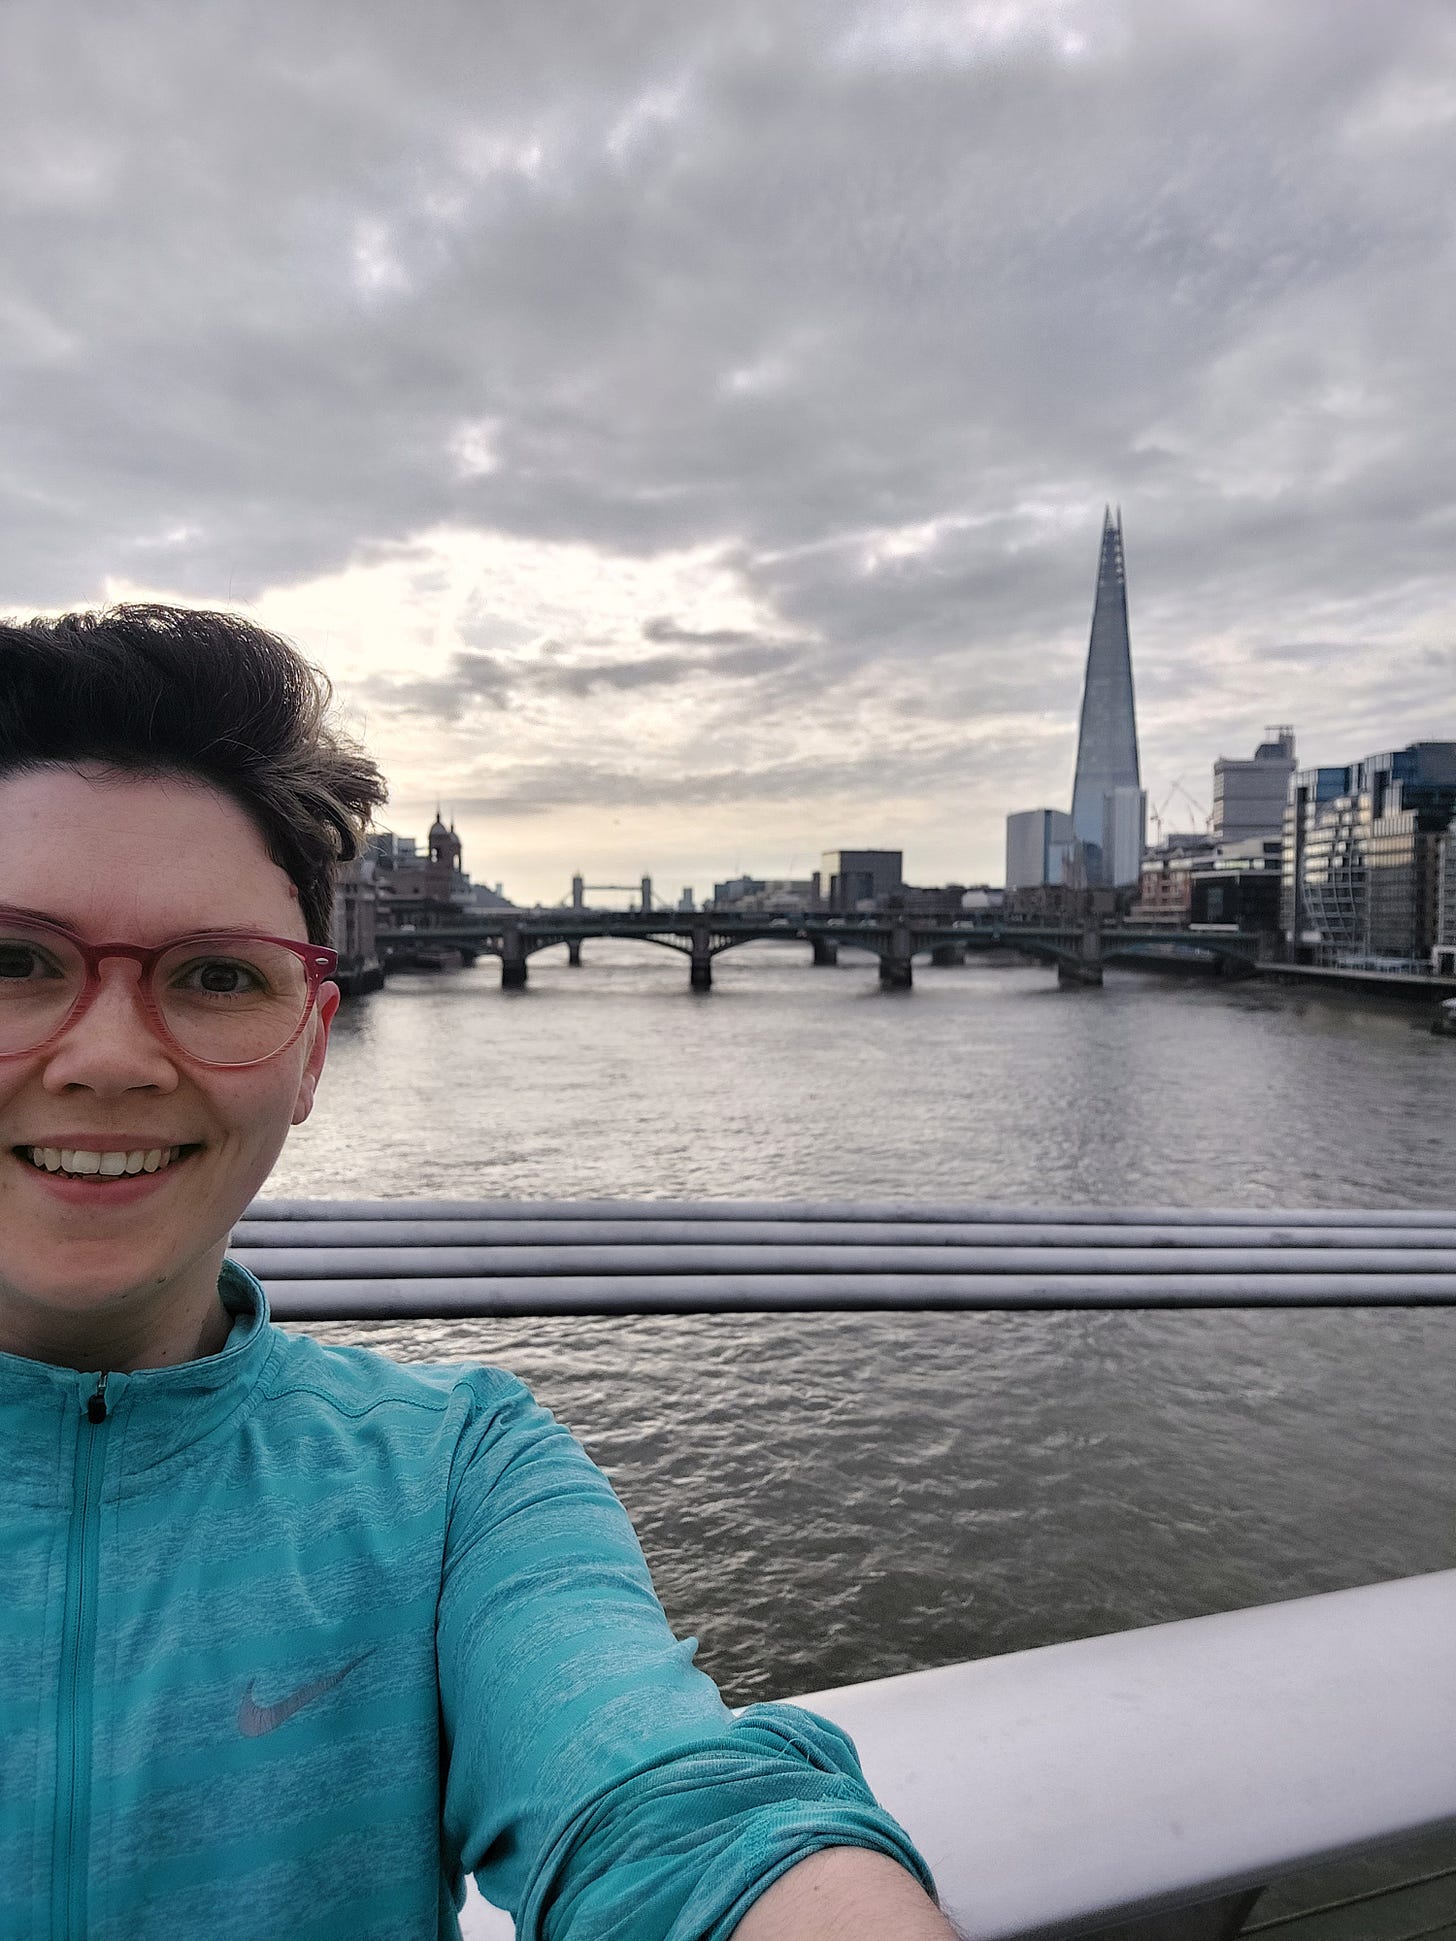 A smiley Janelle (white woman, pink glasses, pixie short brown hair) with the vista of London behind her including the Shard and Tower bridge